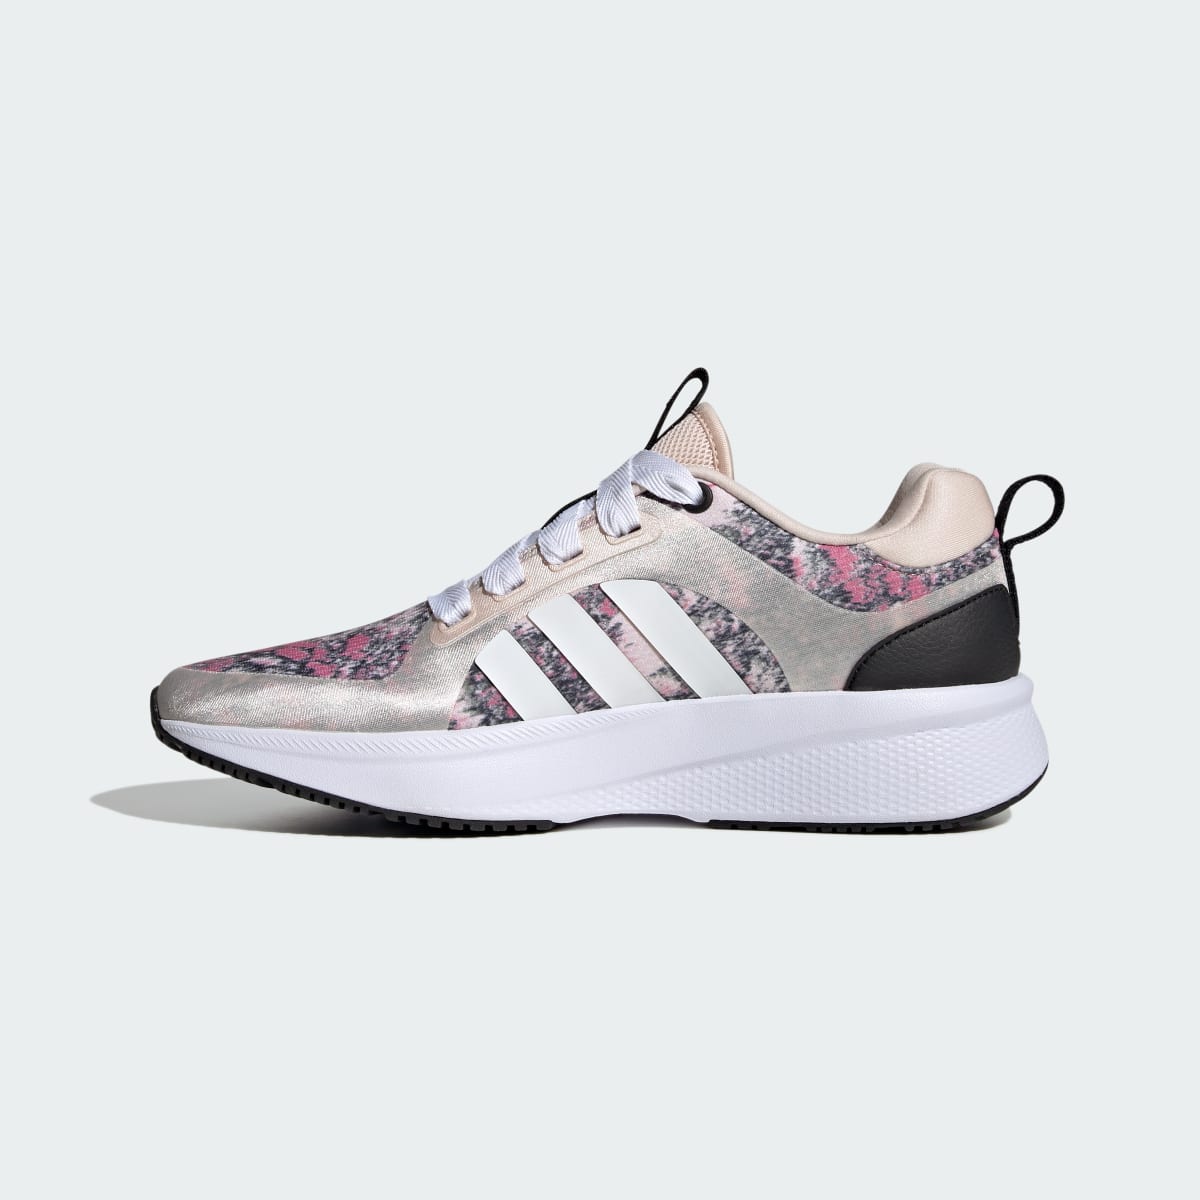 Adidas Edge Lux 6.0 Shoes. 7